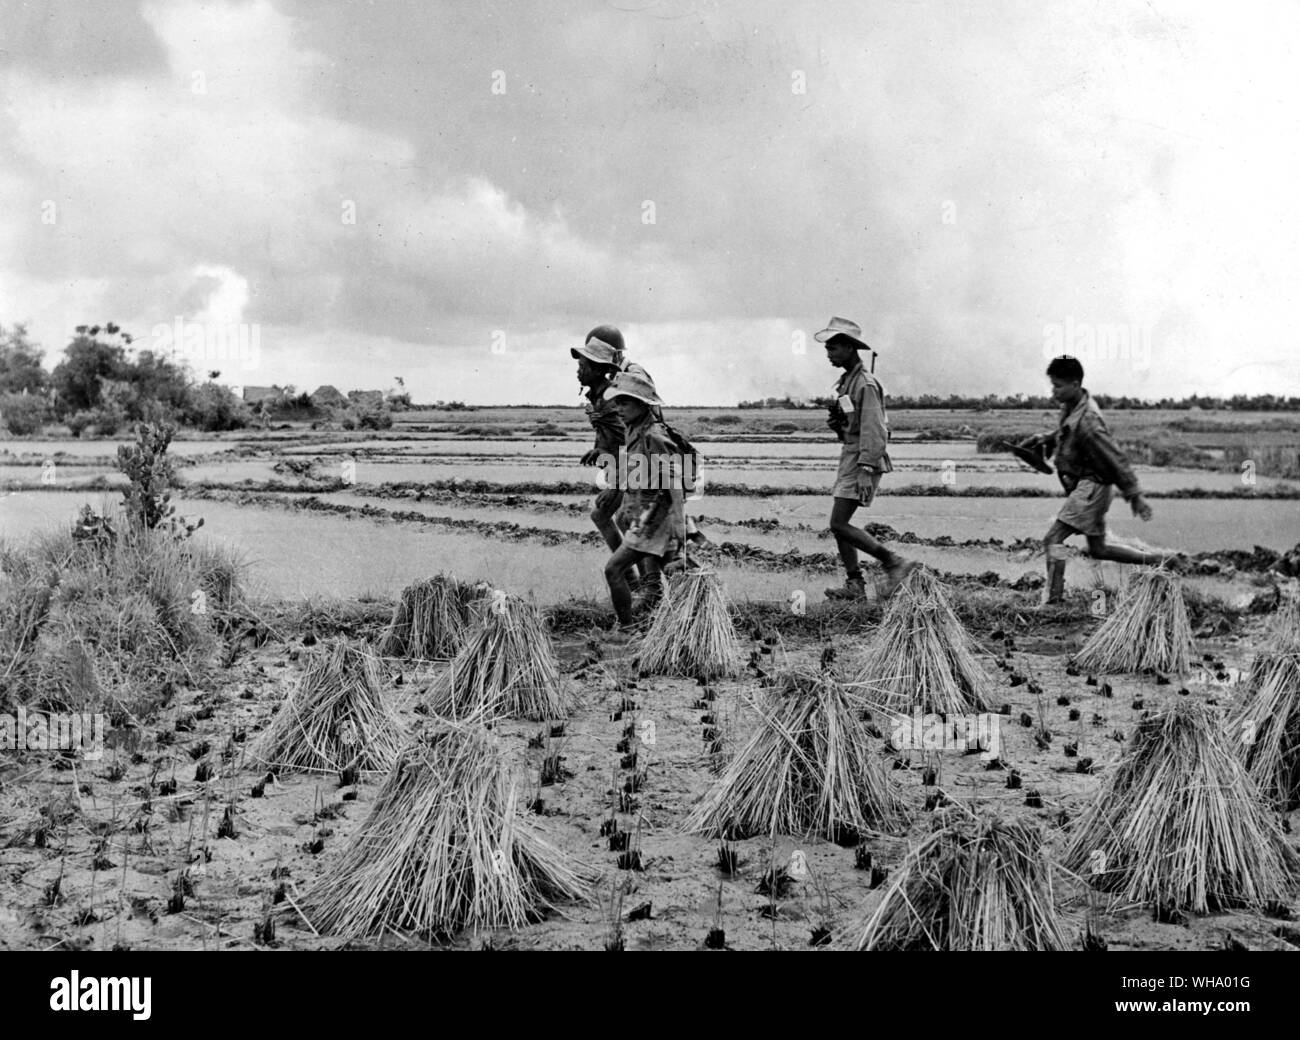 2nd July 1953: The Indo-China war. An injured Vietnamese soldier is helped across the paddy fields by their comrades. Stock Photo